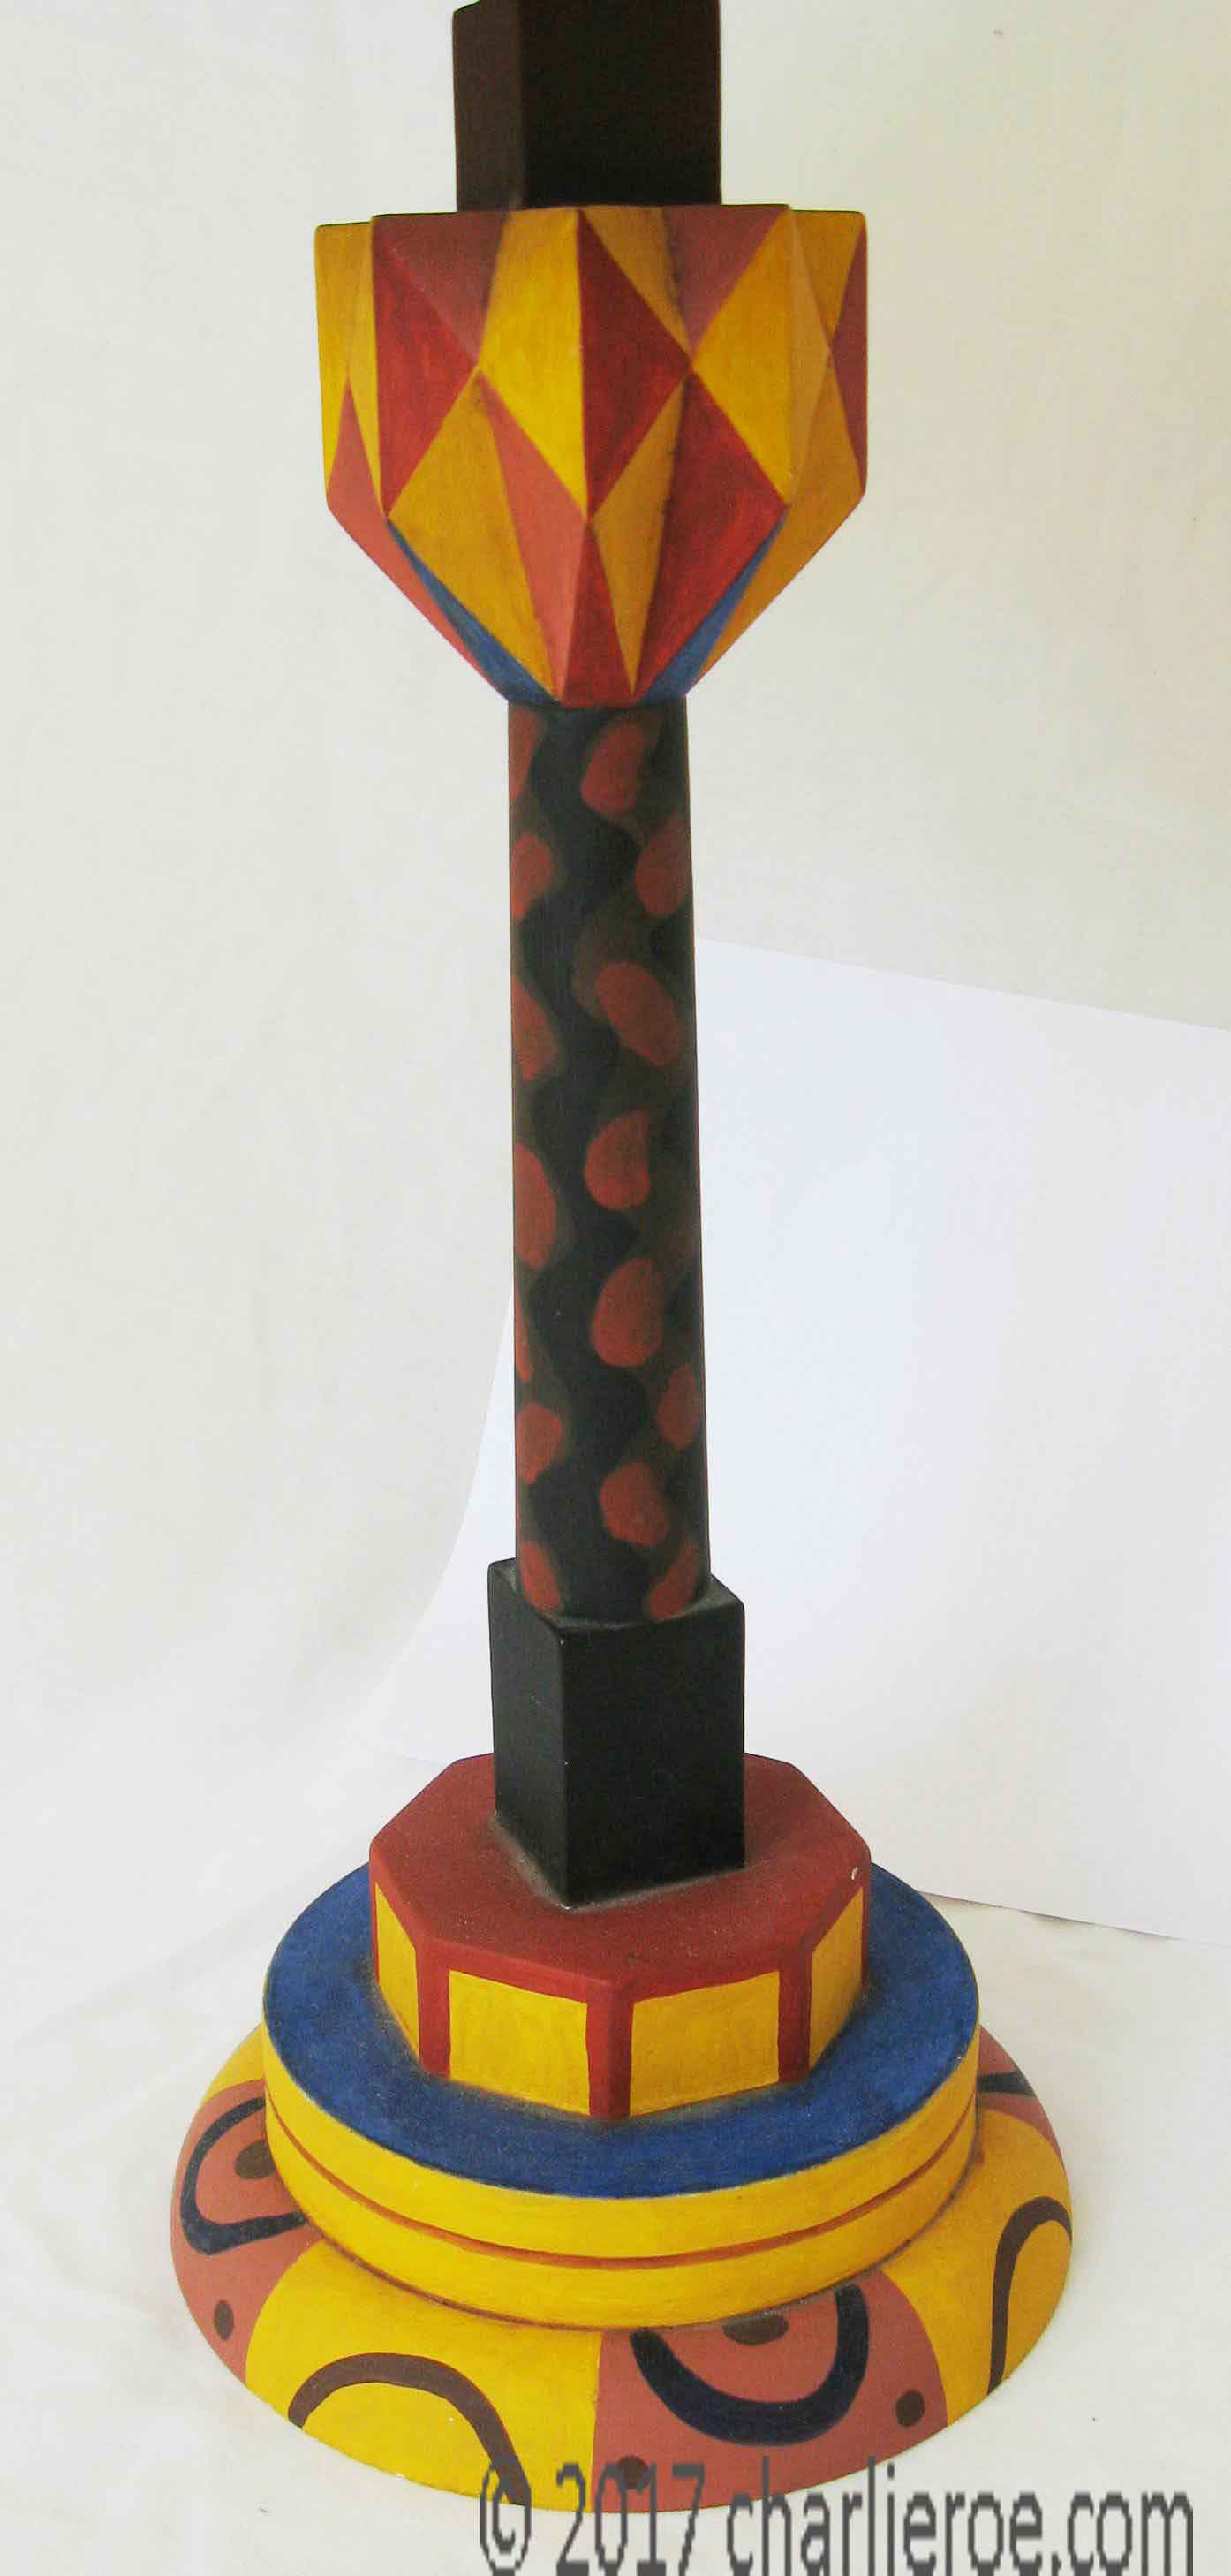 New Omega Workshops painted lamps / lamp bases / lamp stands